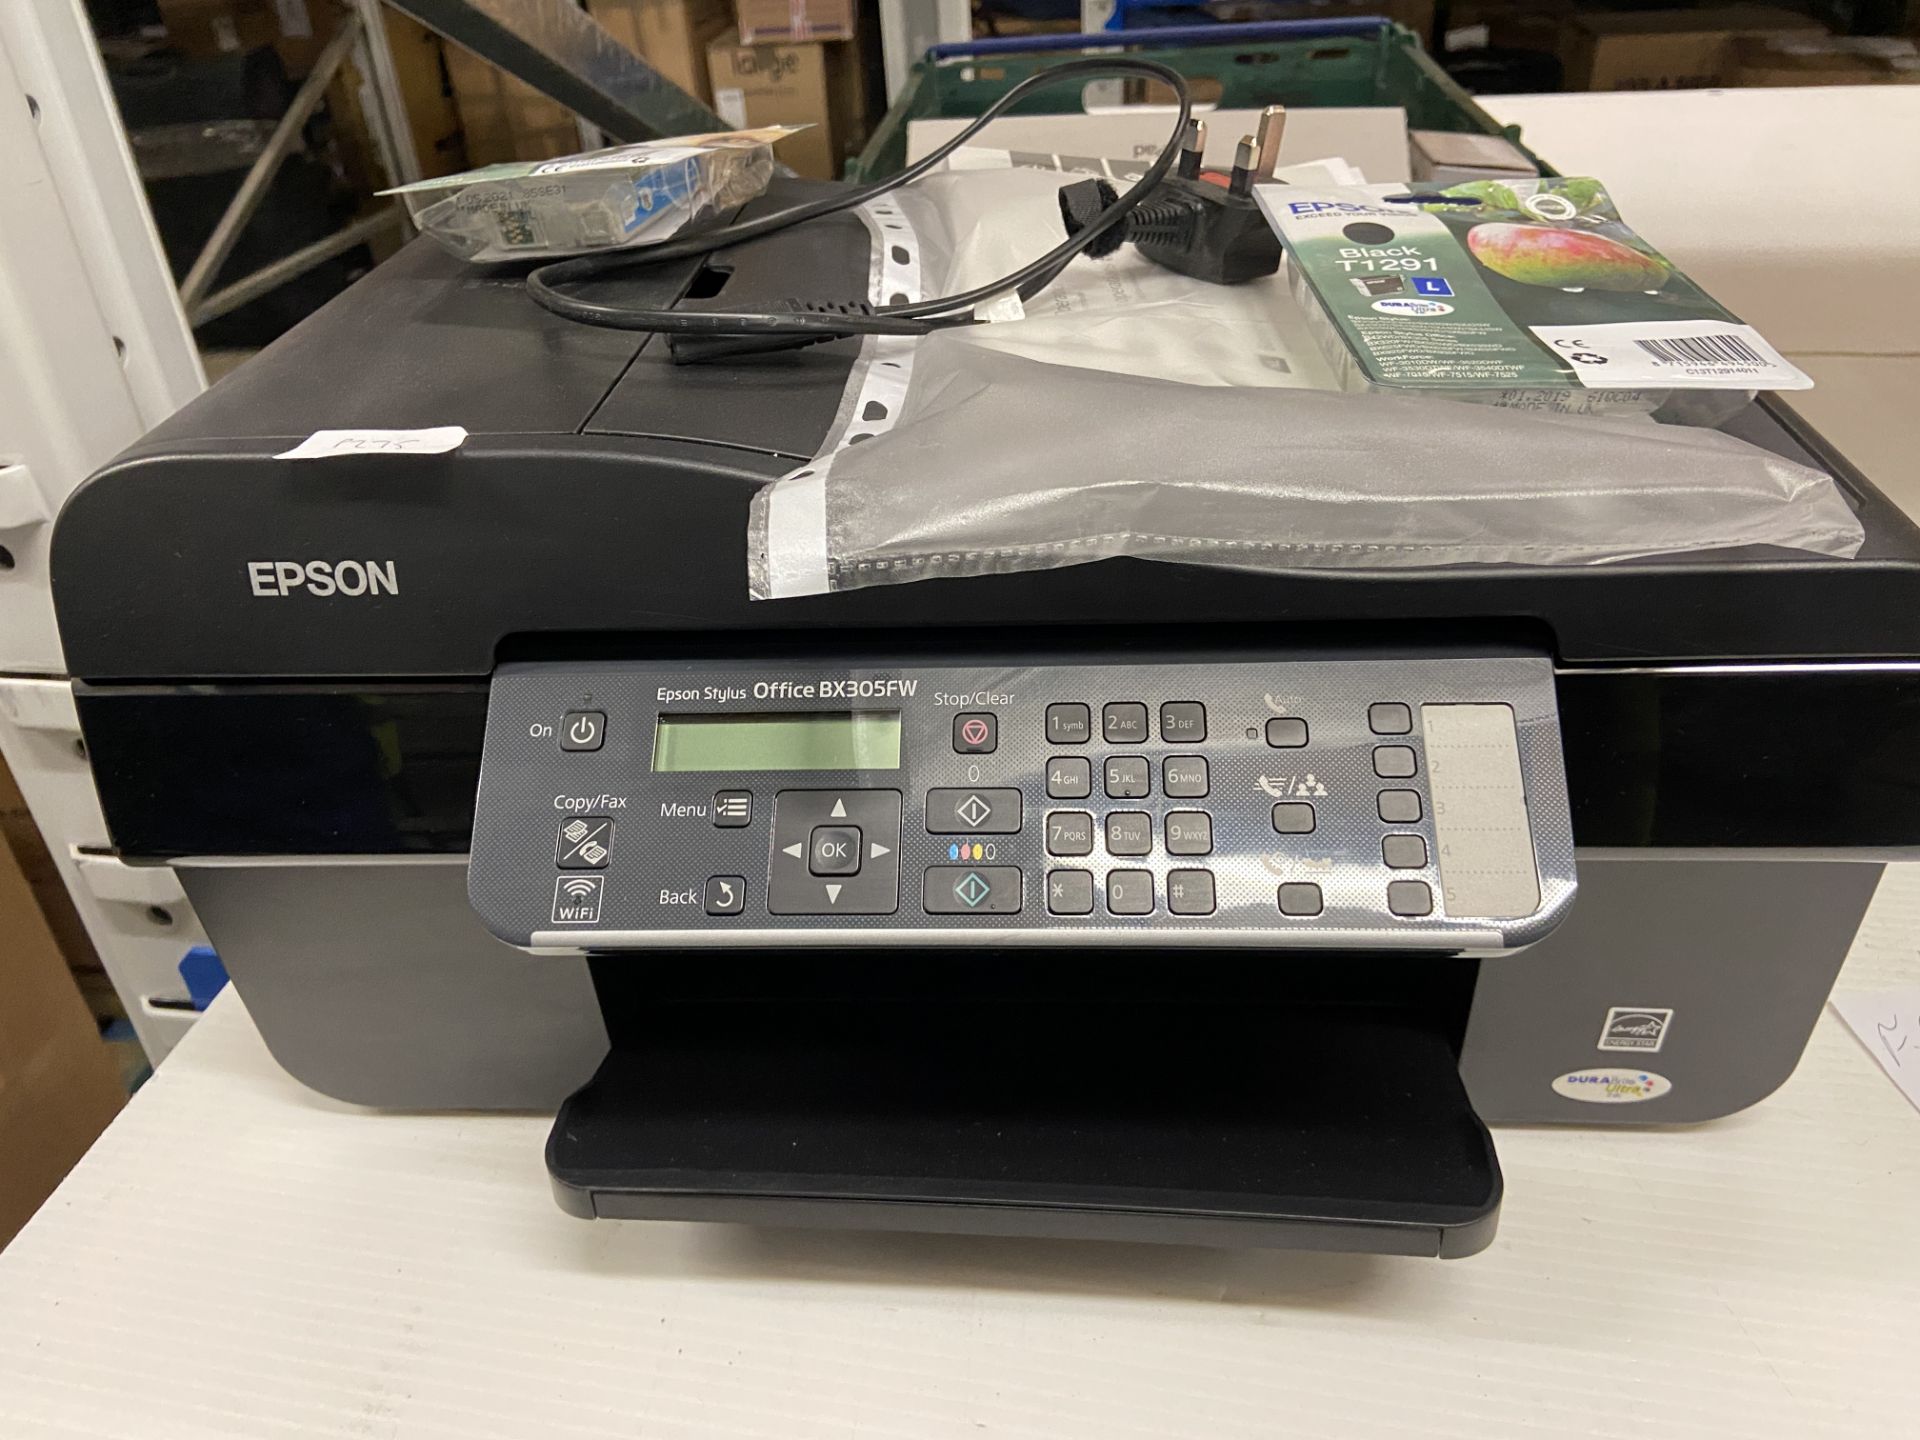 An Epson 305 all in one colour printer complete with manuals,